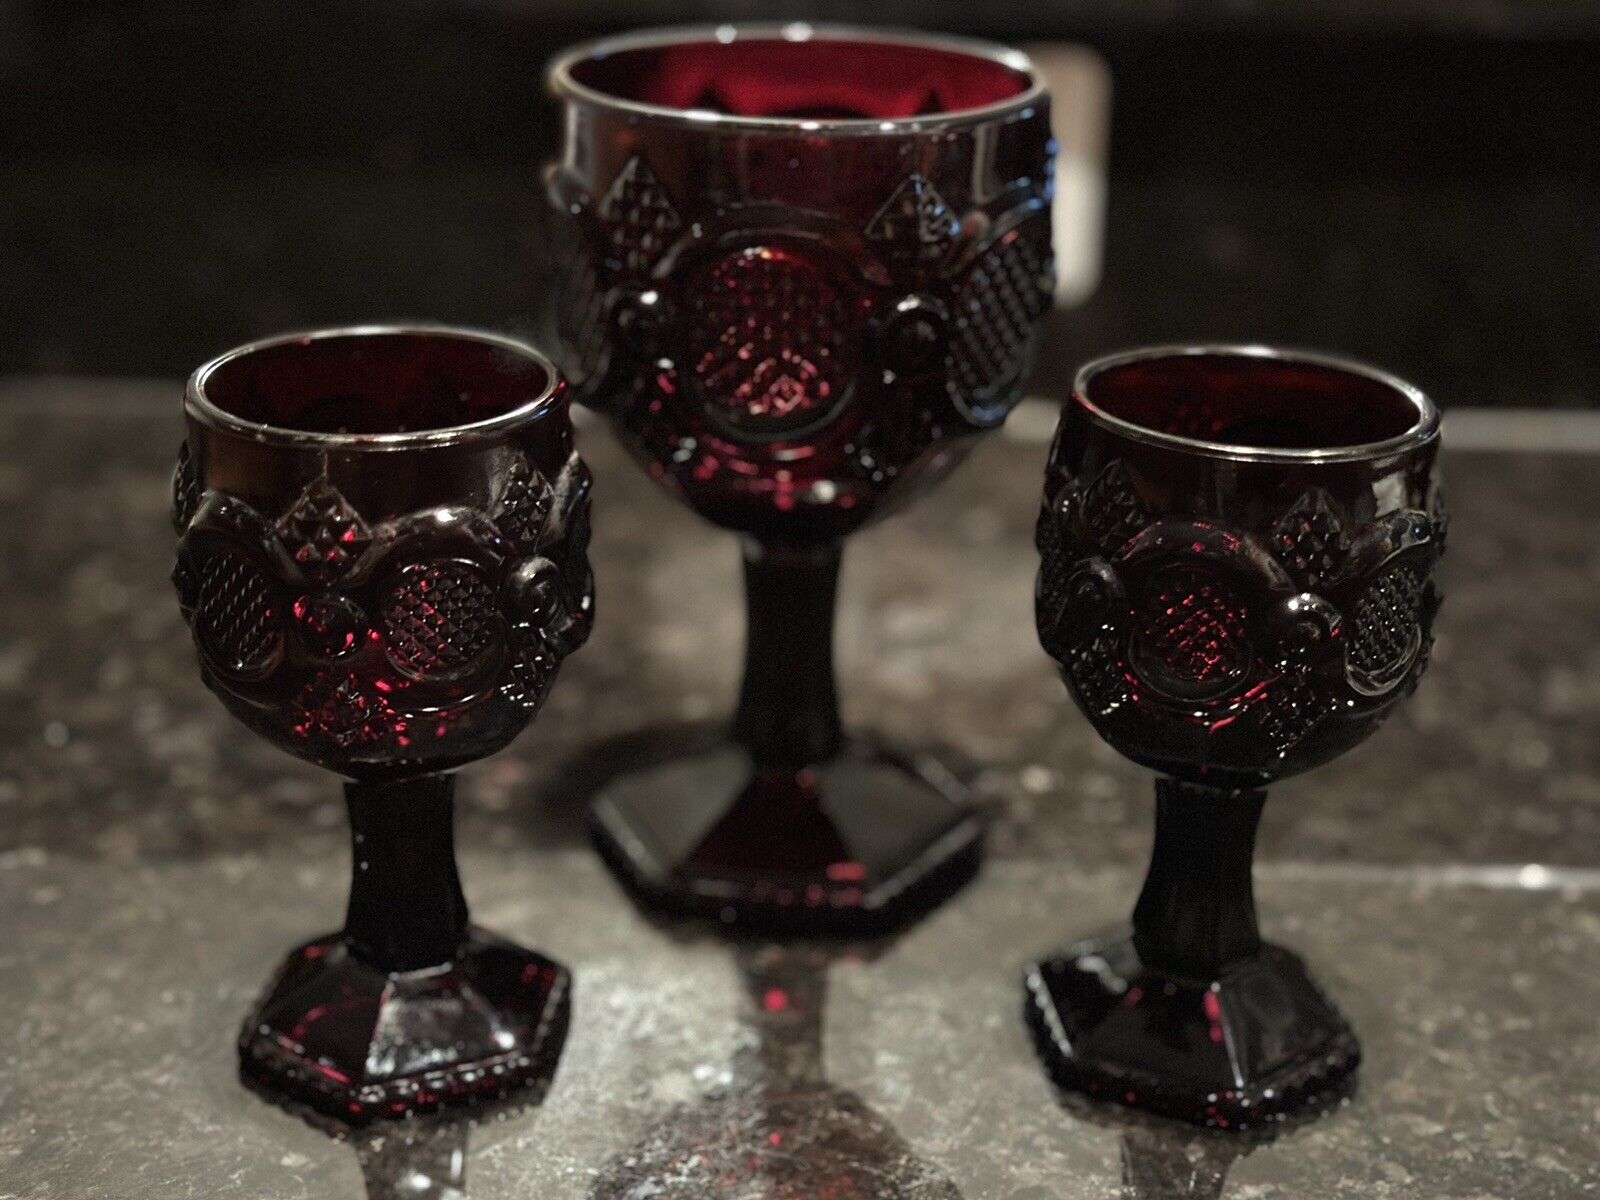 VINTAGE AVON 1876 CAPE COD COLLECTION Set Of 12 Ruby Red GOBLETS CREAMER SUGAR